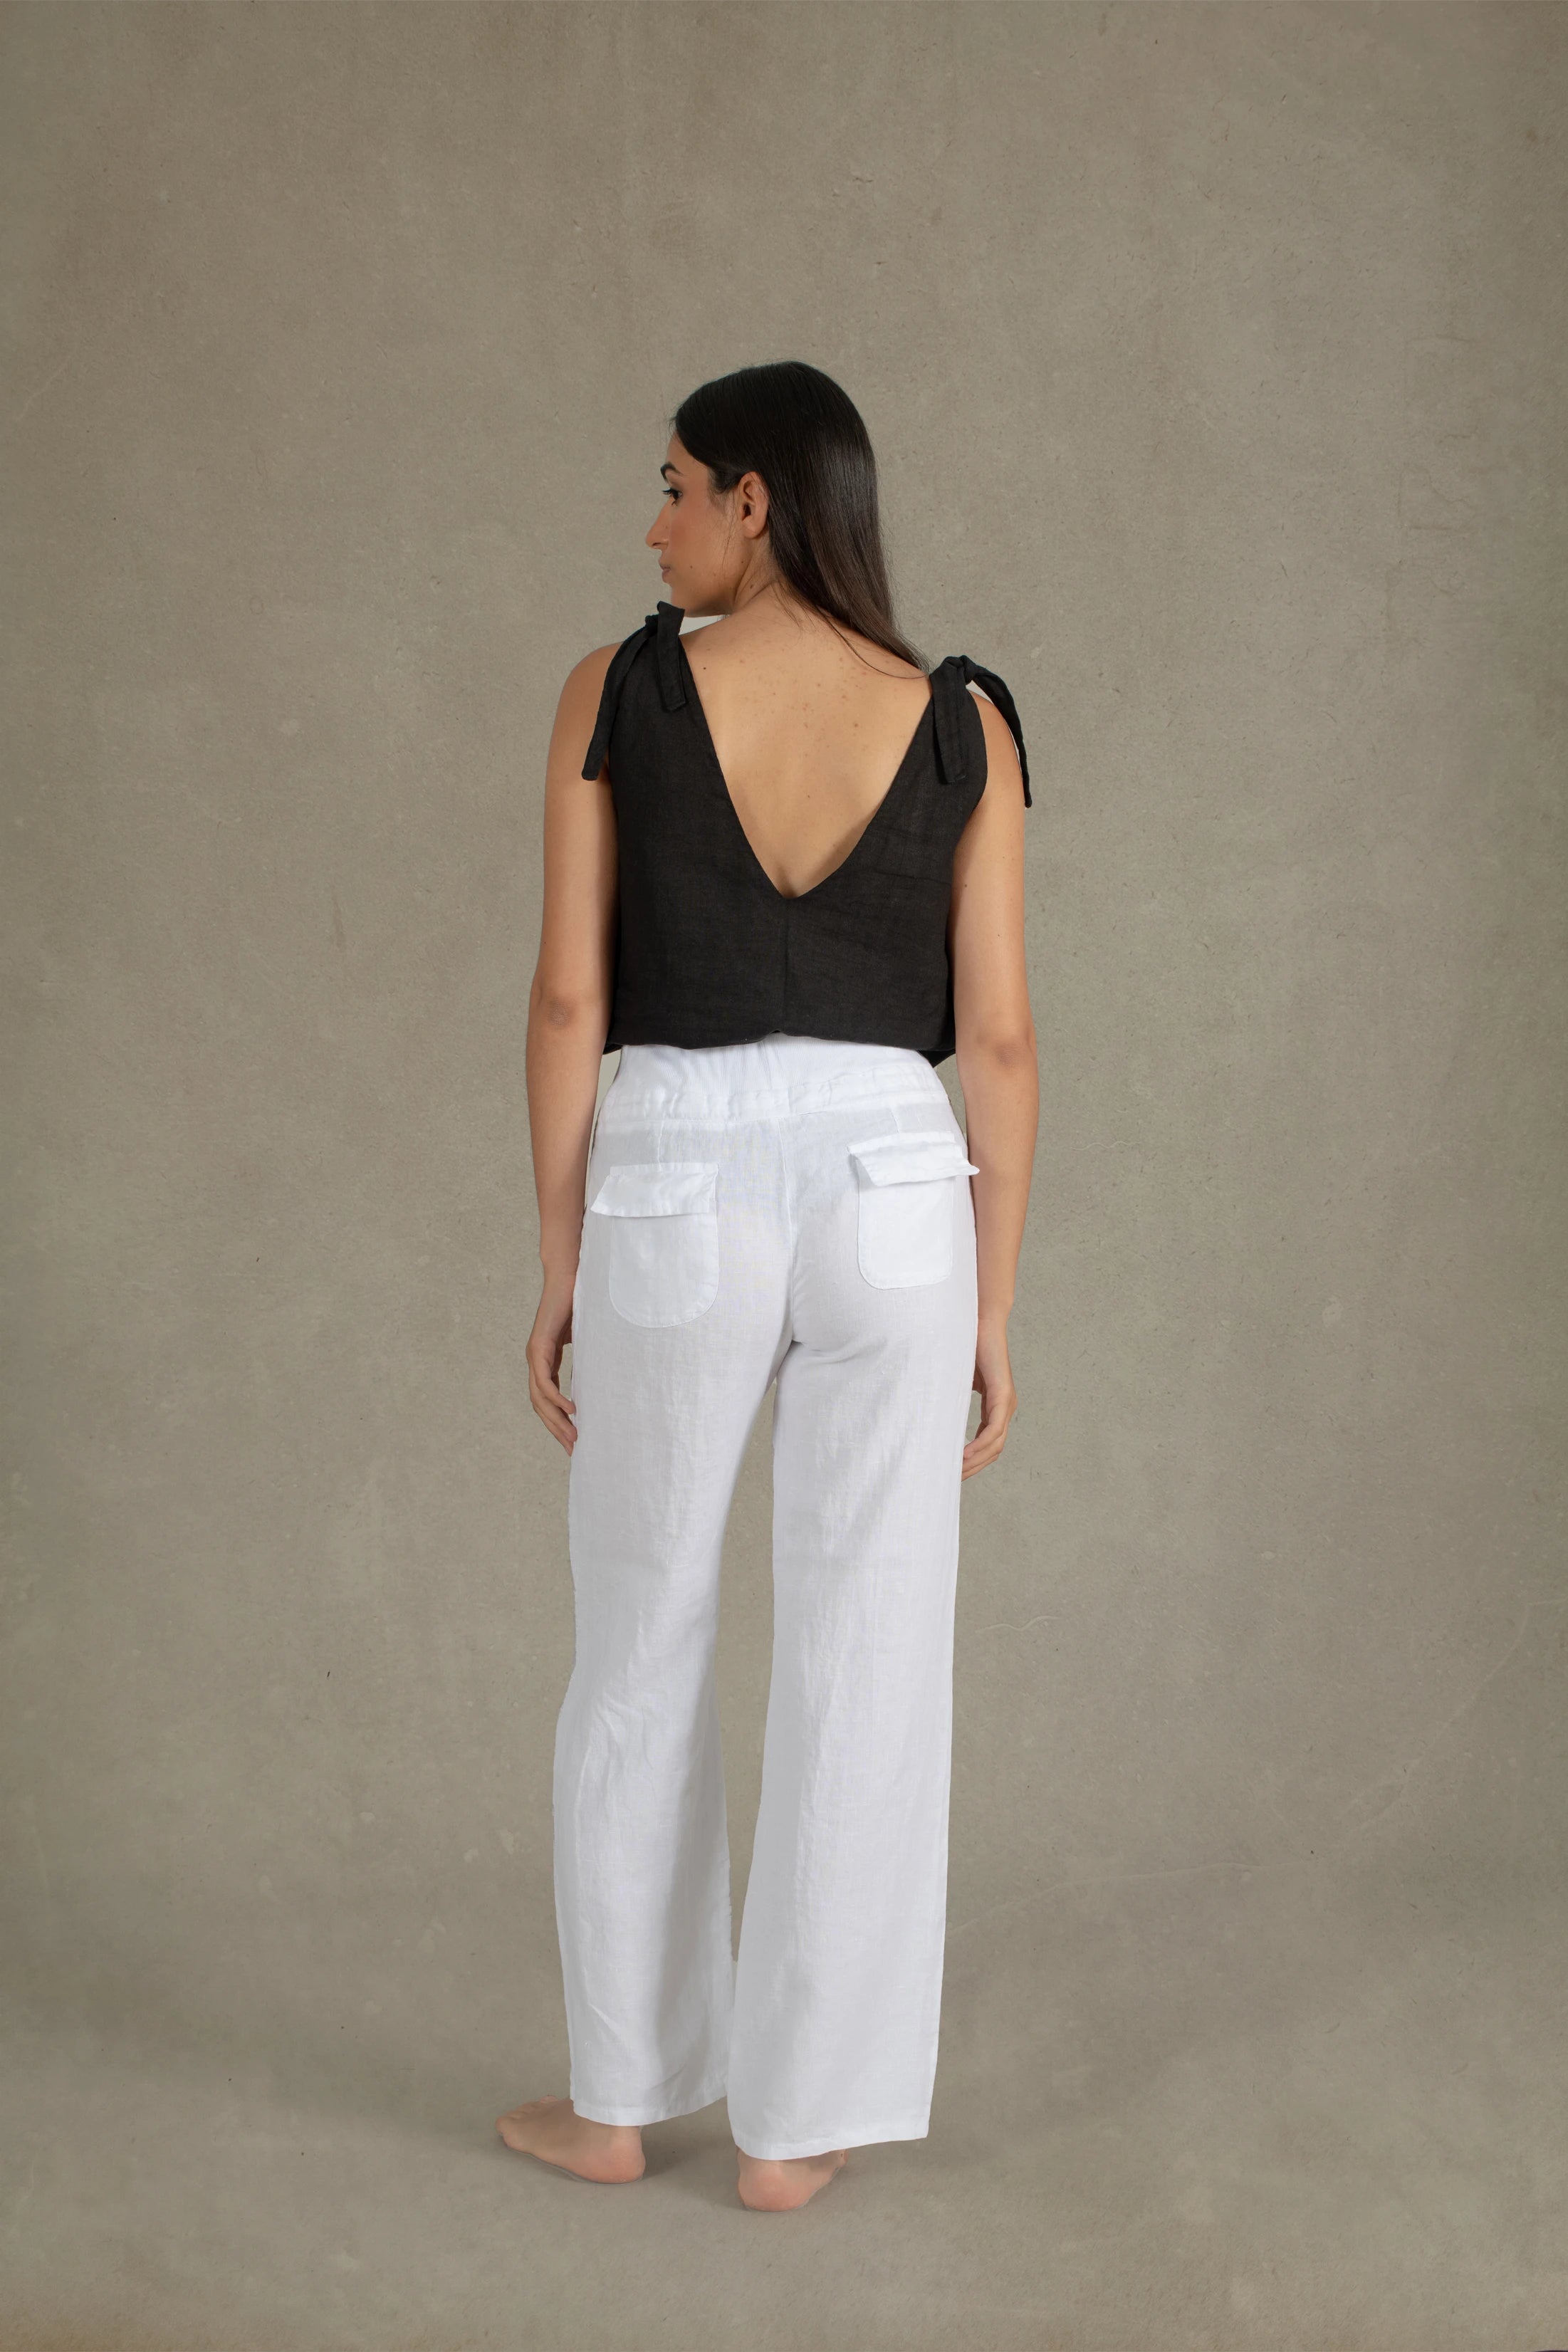 How To Wear Linen Pants For Work That Guarantee An Impression – LUXMII